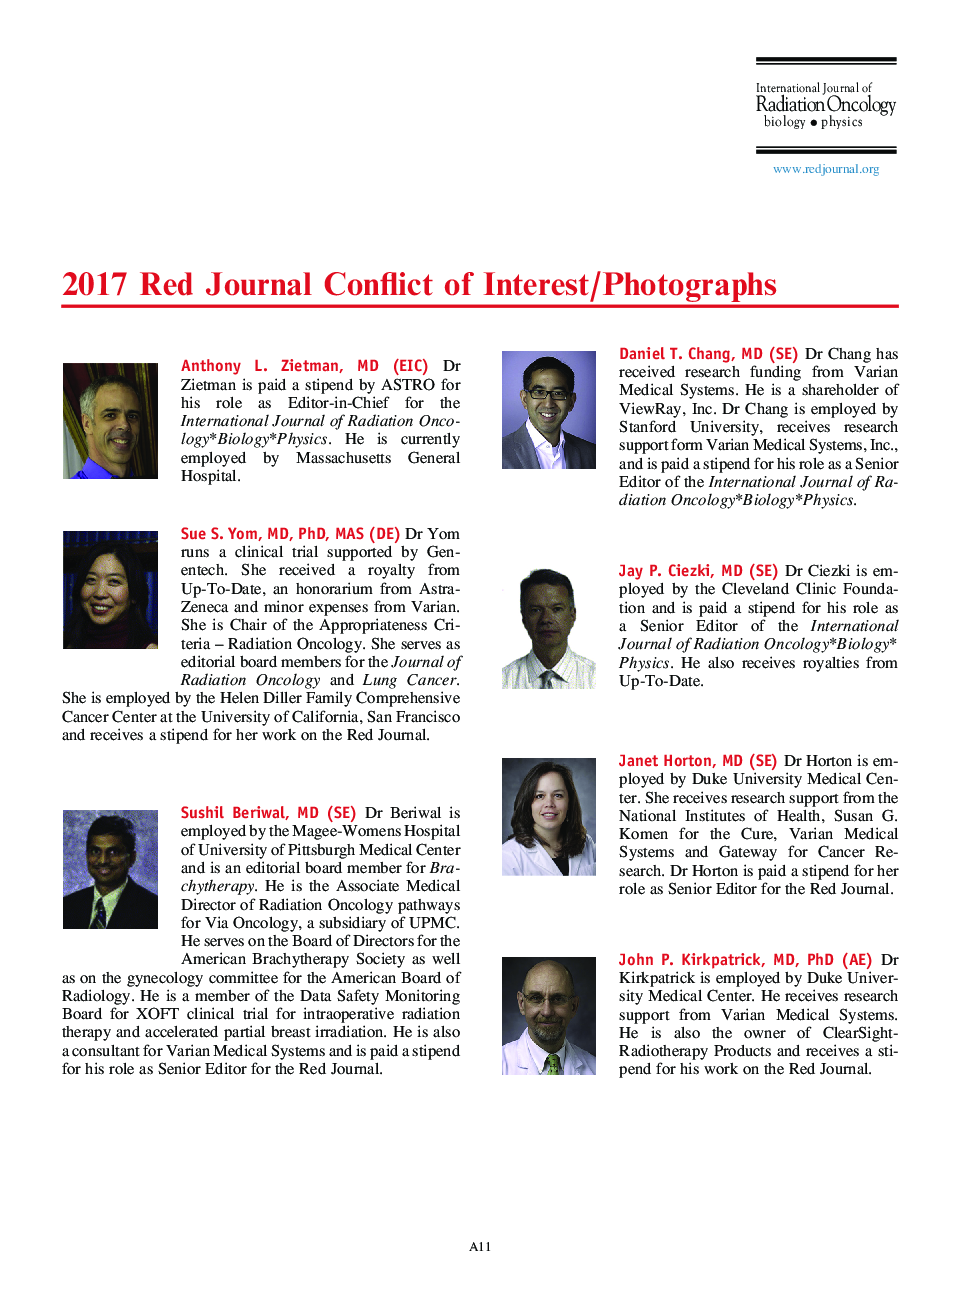 2017 Red Journal Conflict of Interest/Photographs